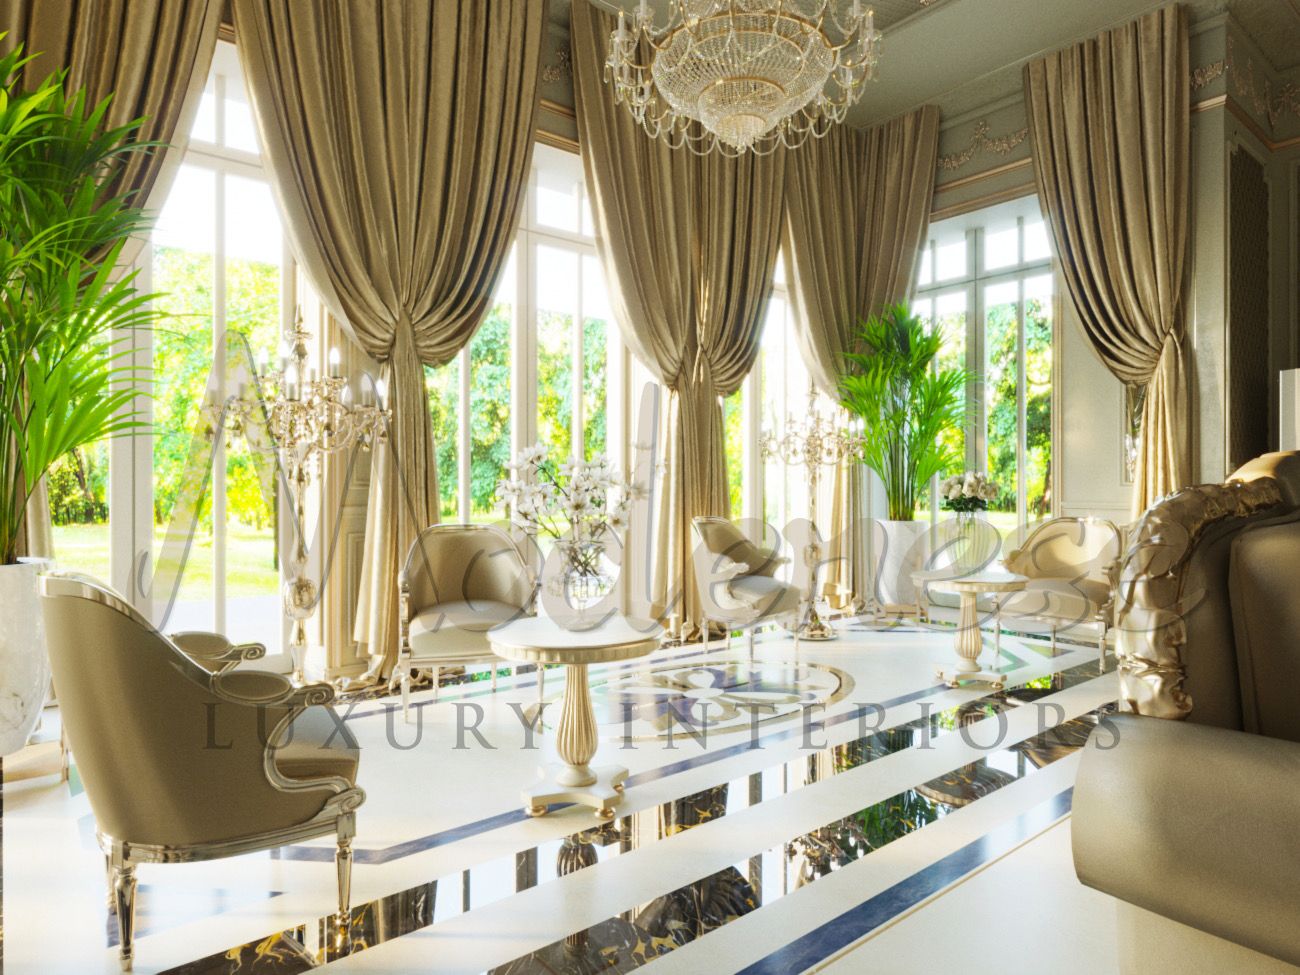 Luxury Curtains Design. Italian Furniture For Luxury Projects. Bespoke High-End Furniture From Italy